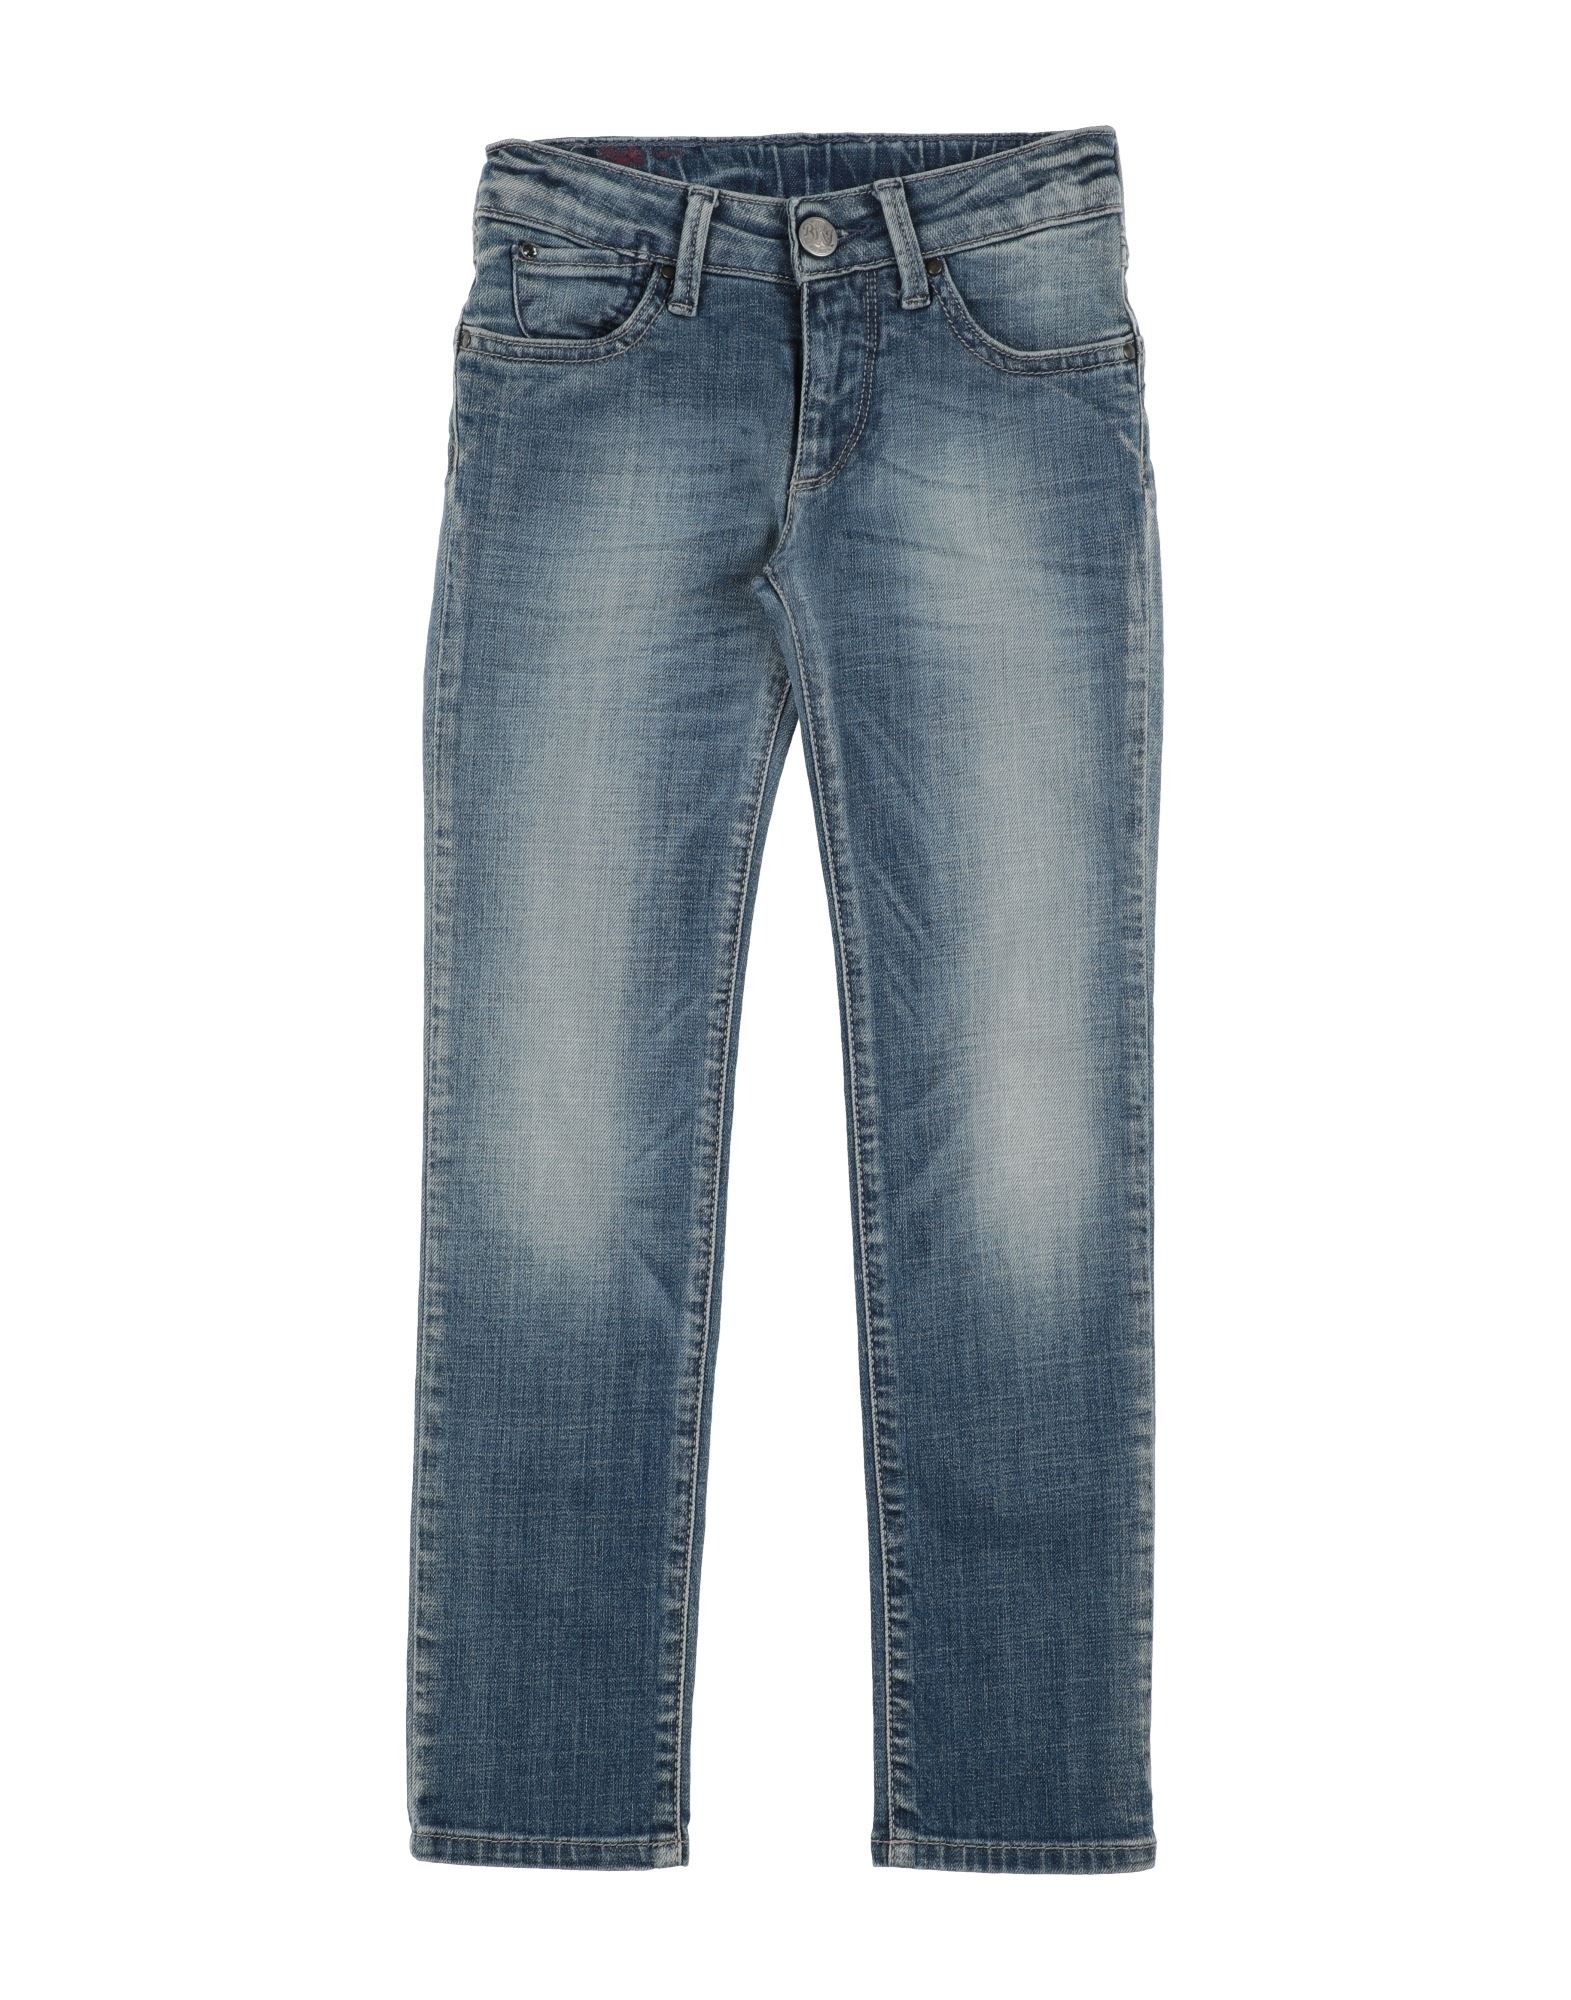 REPLAY & SONS REPLAY & SONS JEANS